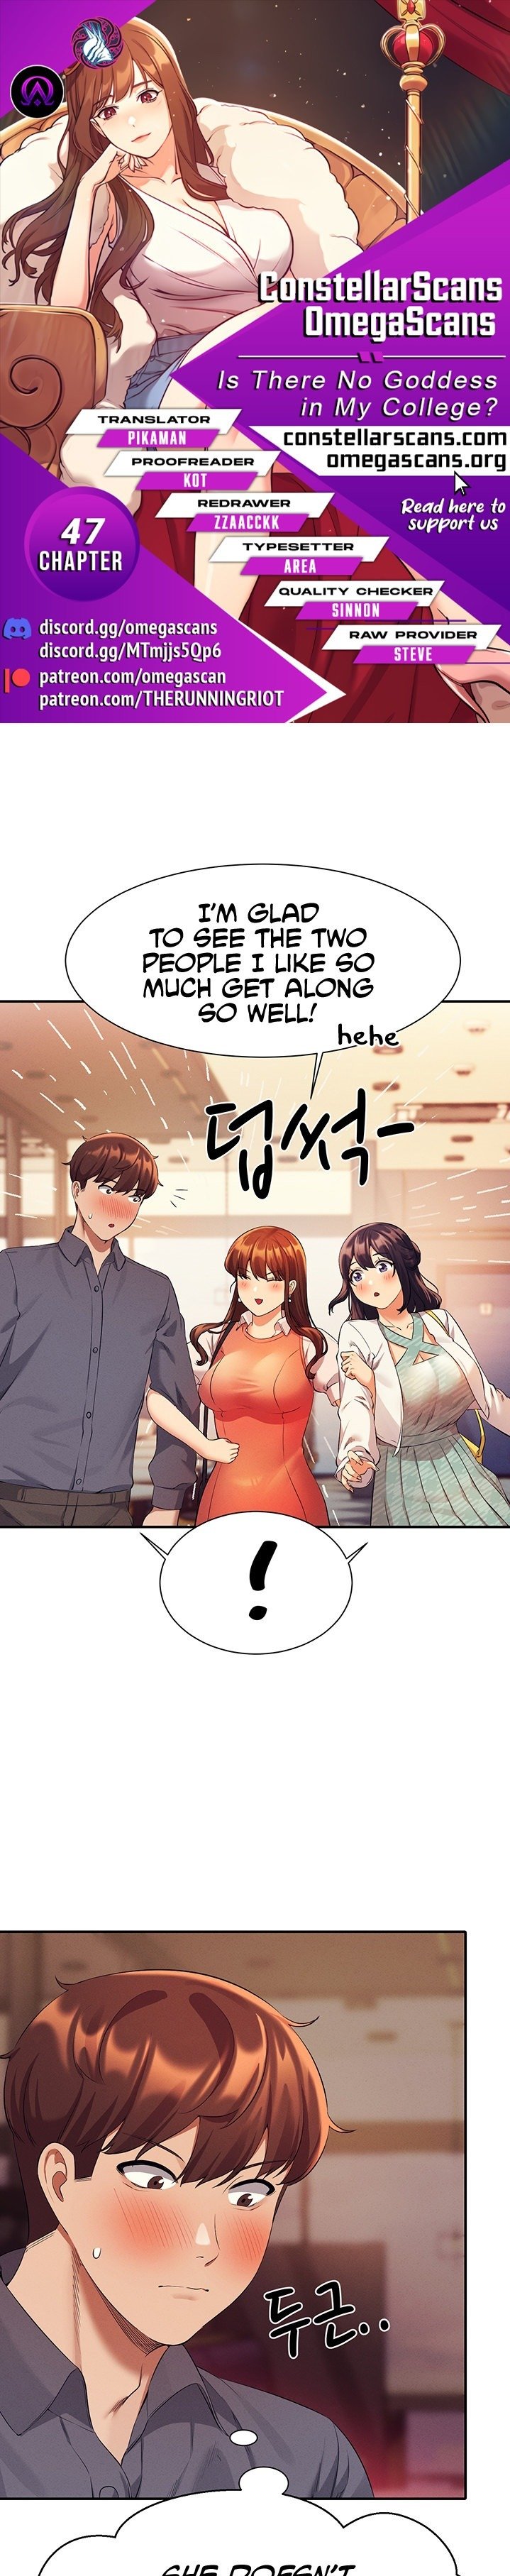 is-there-no-goddess-in-my-college-001-chap-47-0